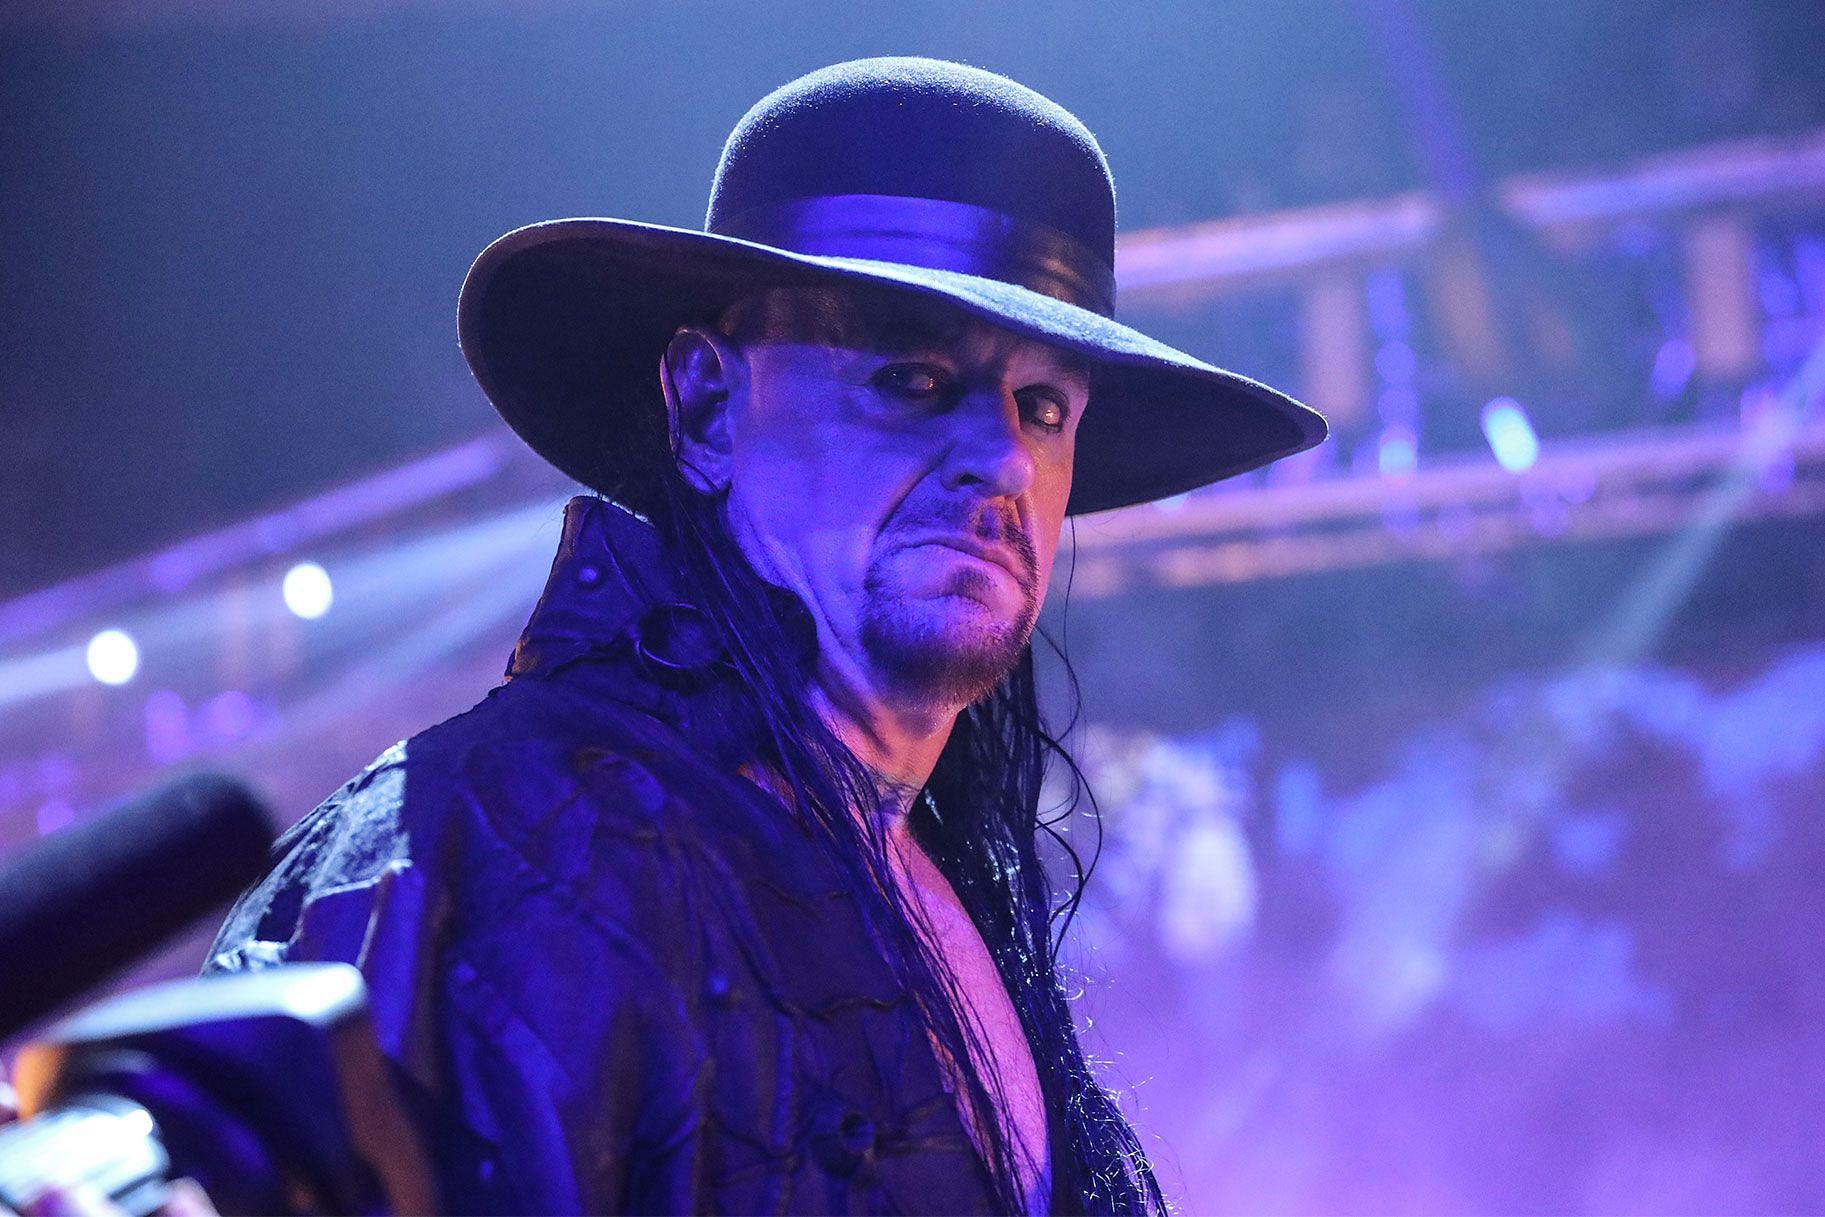 The Deadman has had one of the most illustrious careers in pro wrestling.